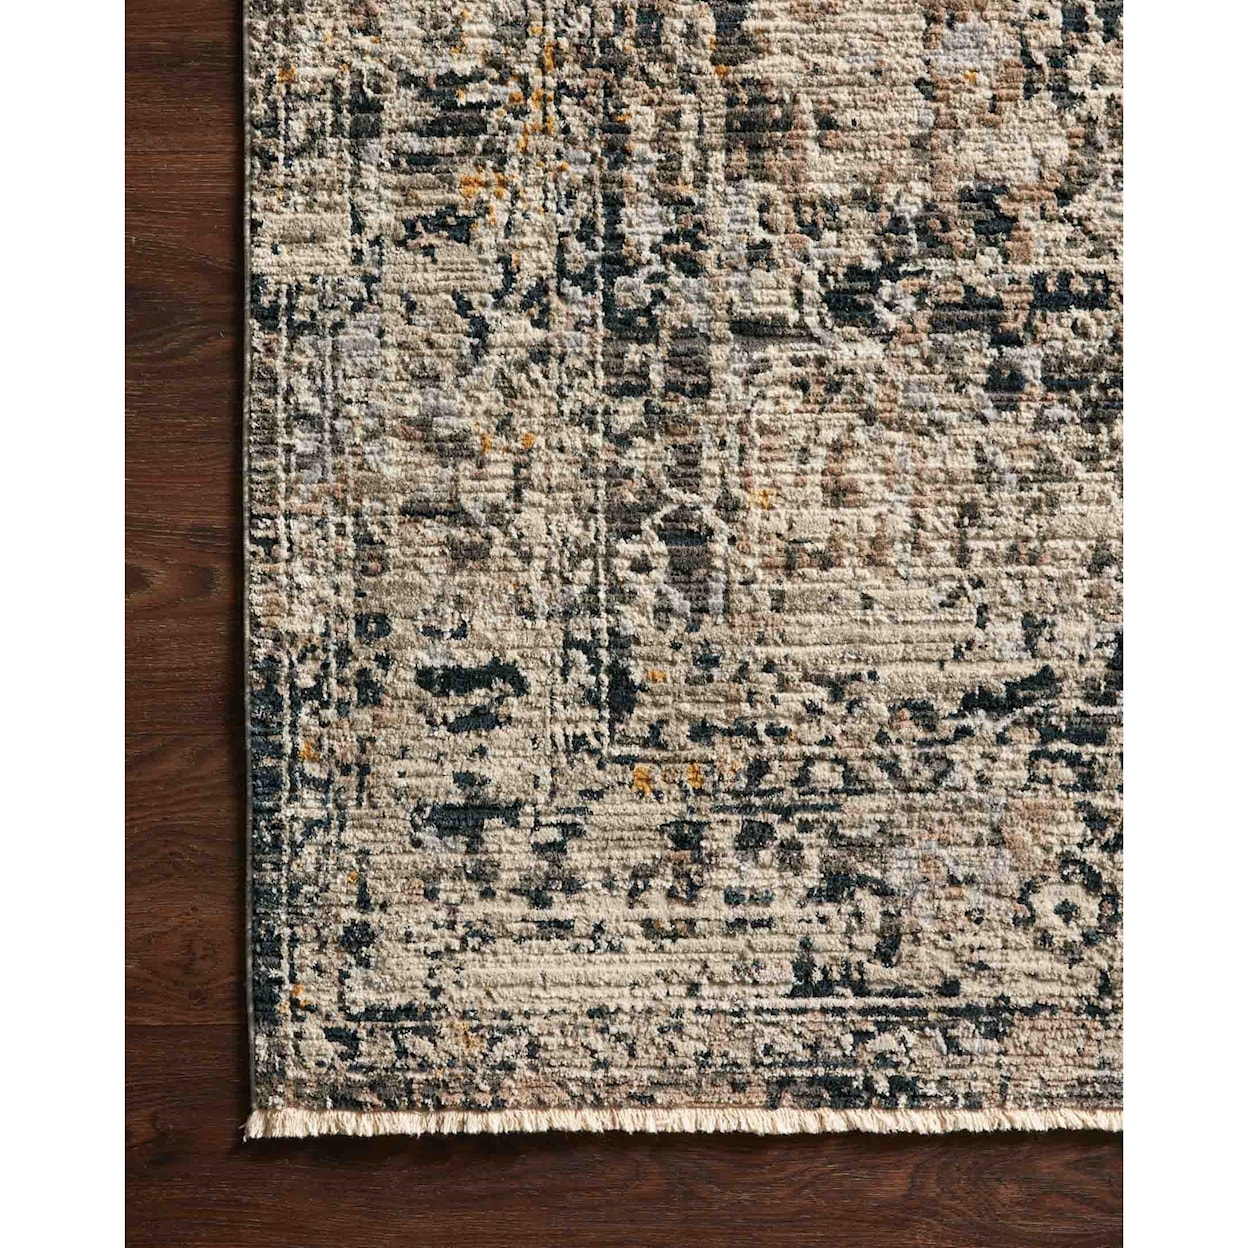 Loloi Rugs Leigh 6'7" x 9'6" Charcoal / Taupe Rug